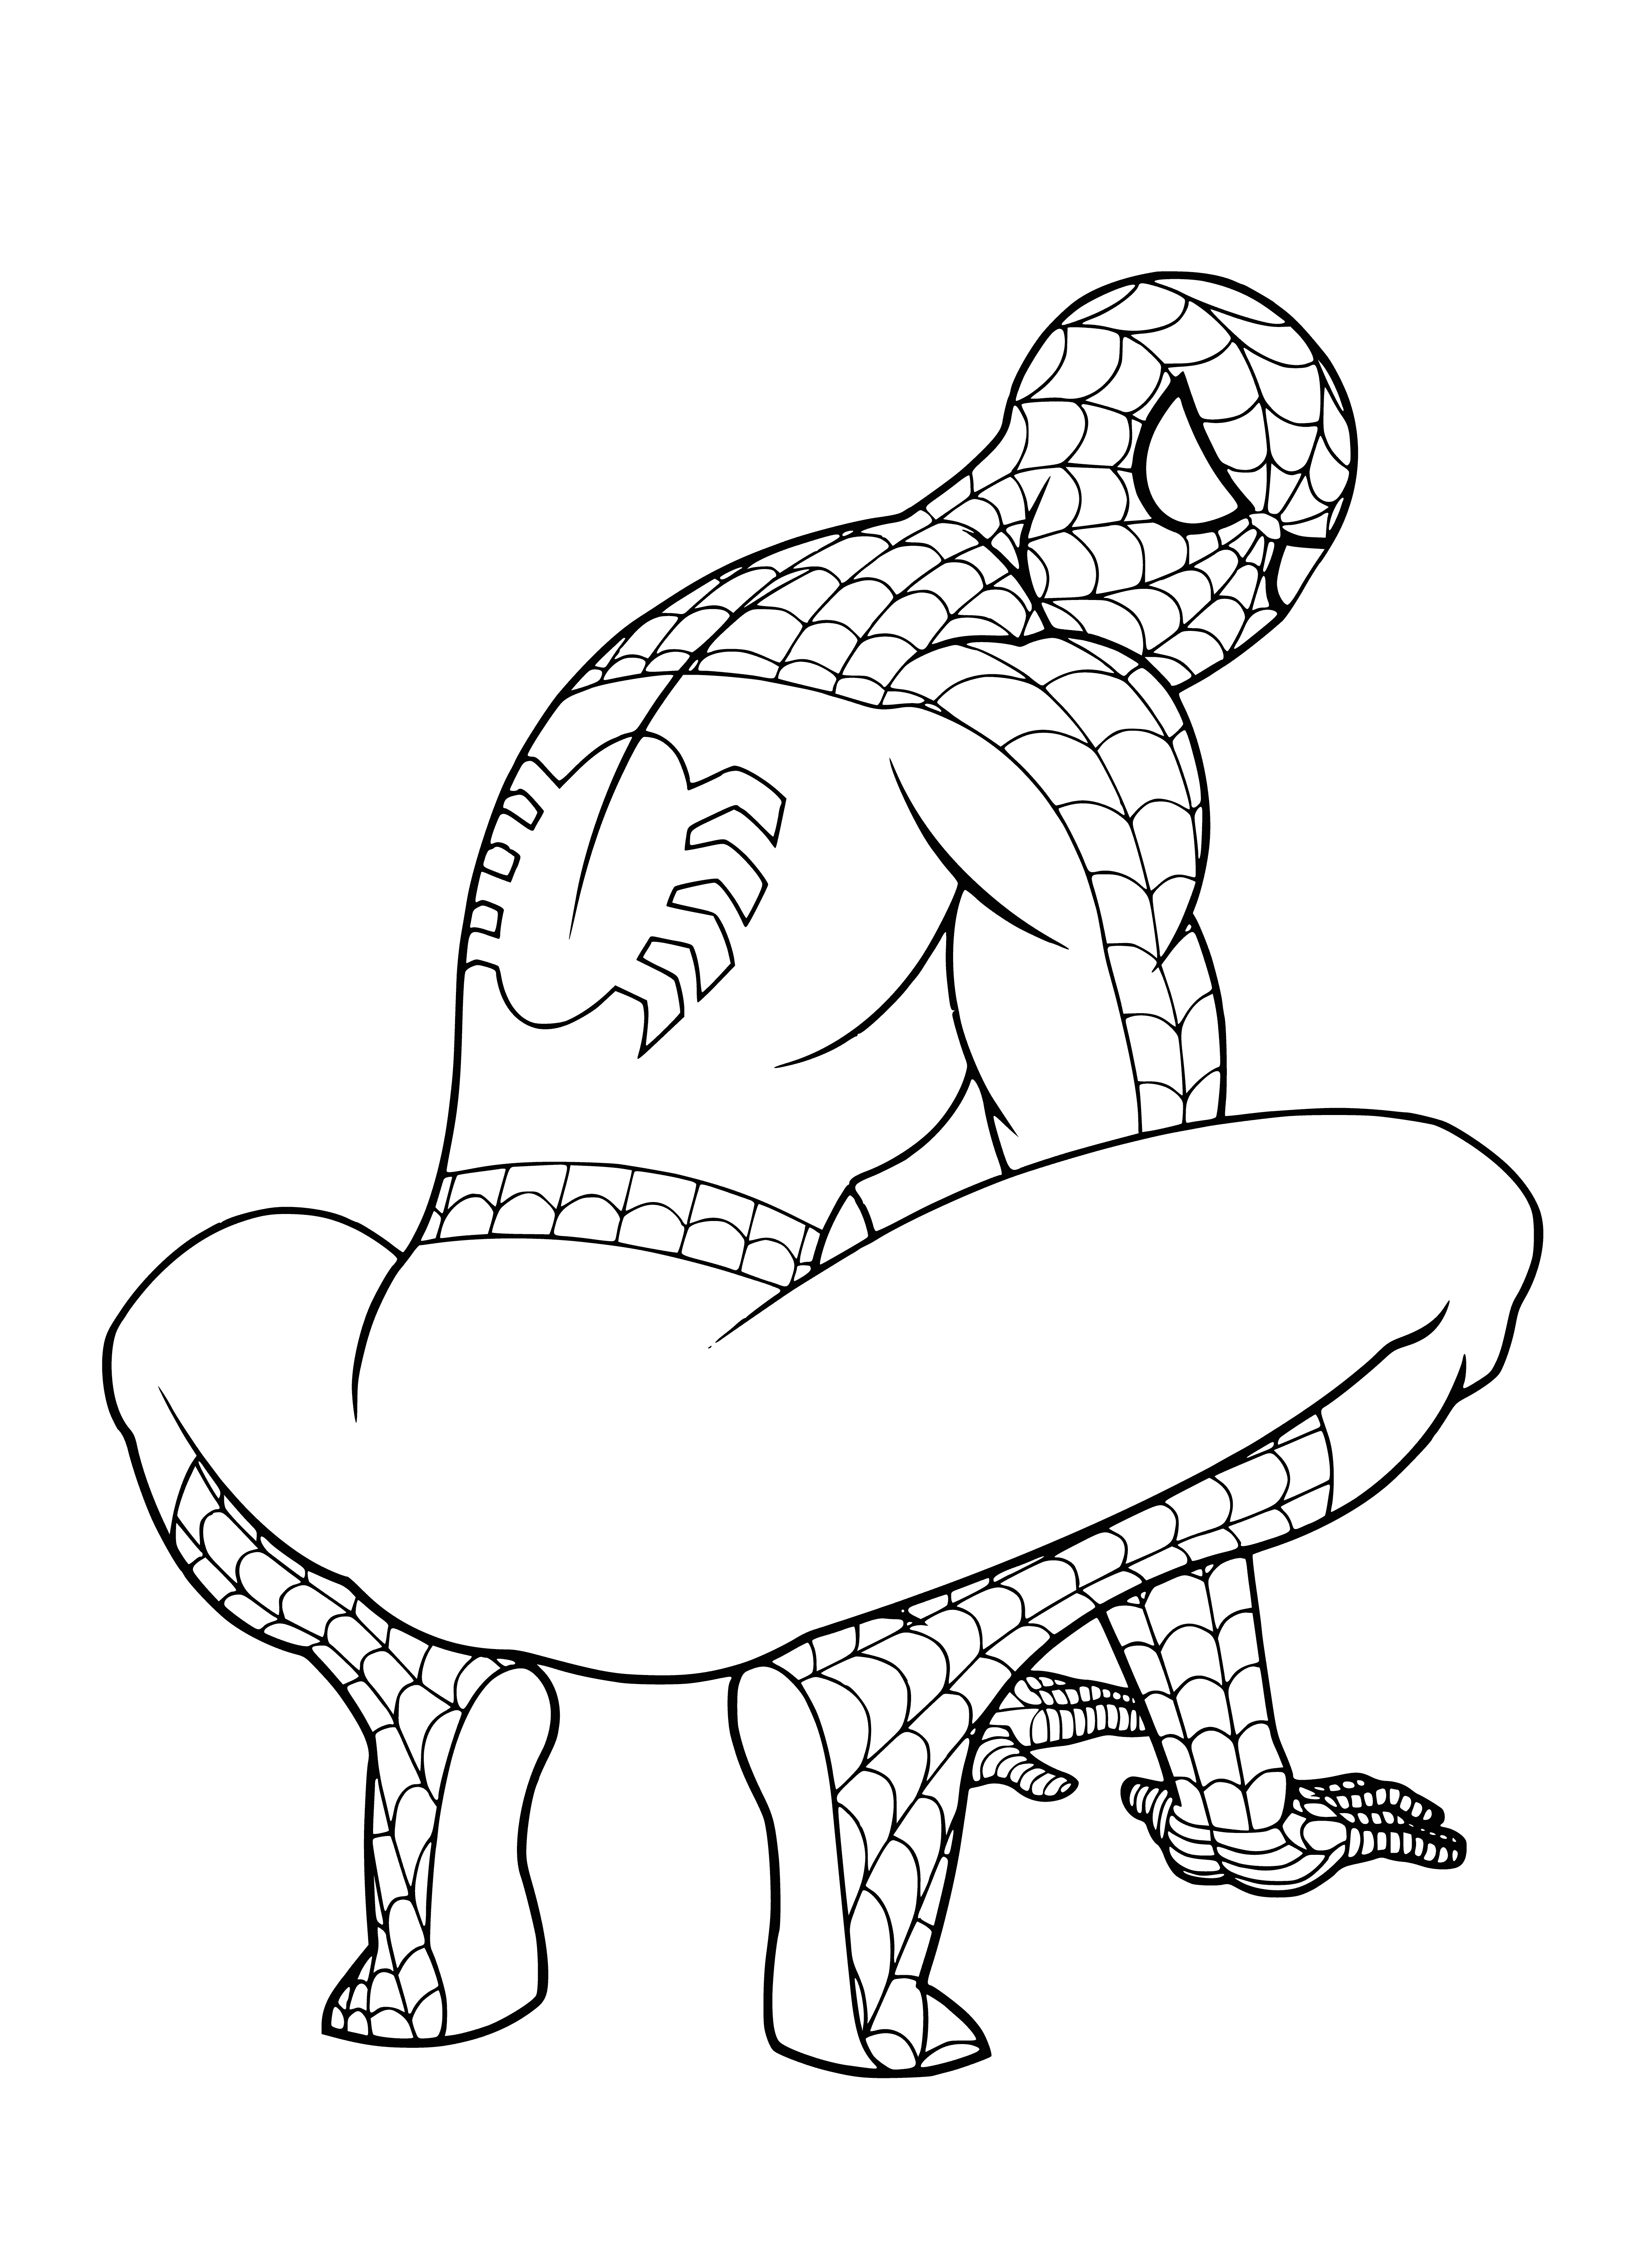 coloring page: Spiderman uses his superhuman powers to fight crime. He can stick to walls, shoot webs, move quickly and lift heavy objects.